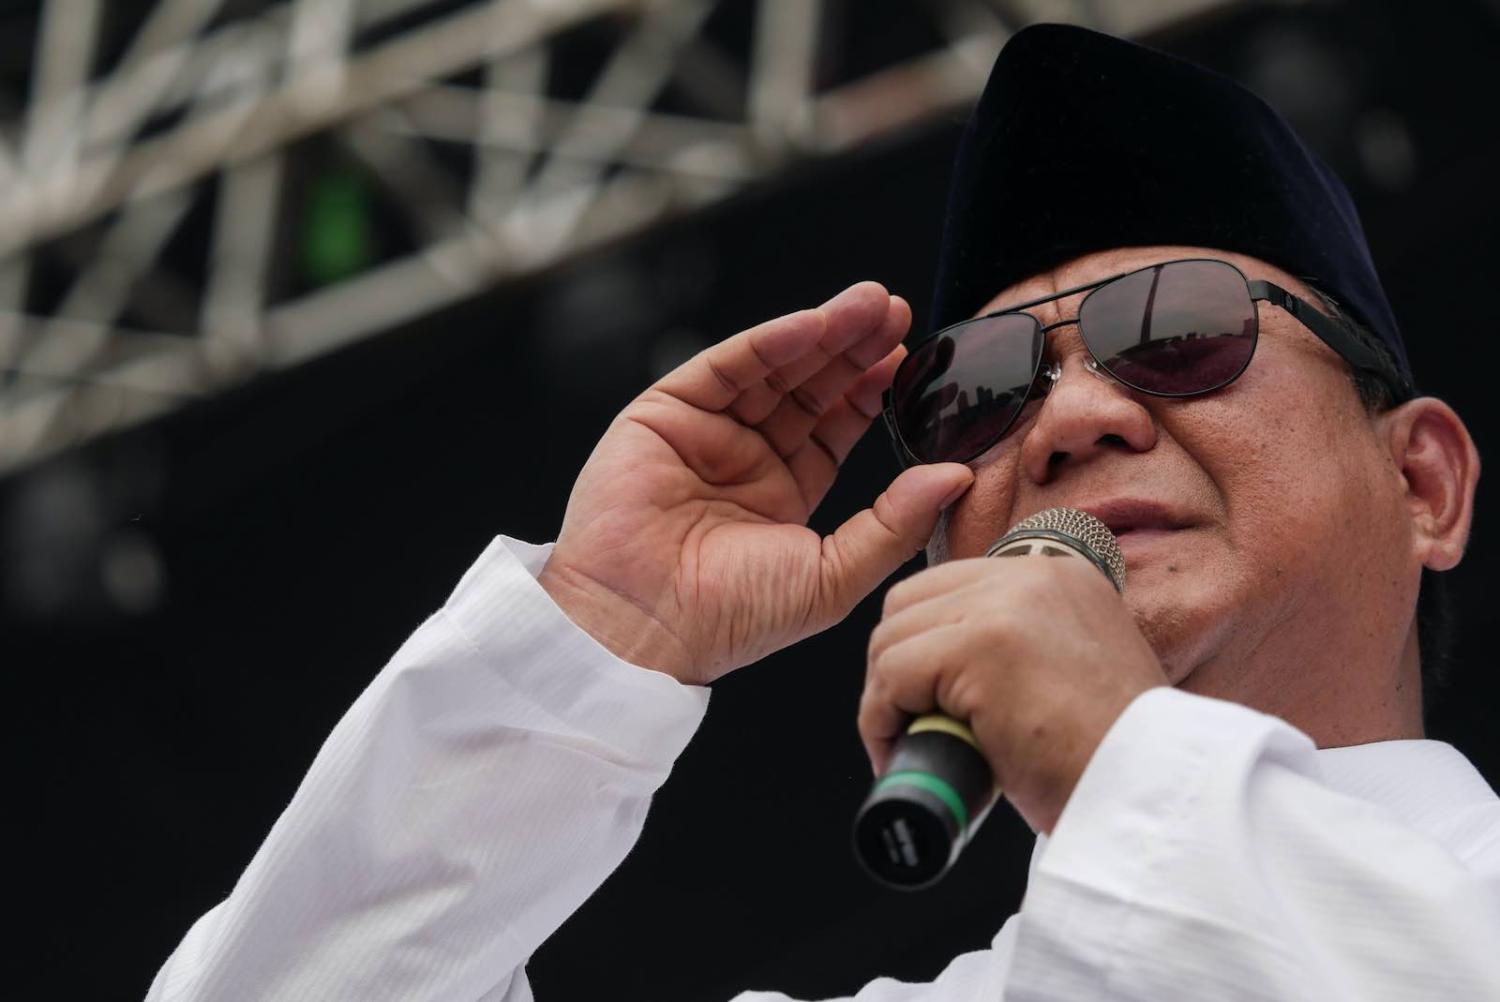 Indonesia’s Defence Minister Prabowo Subianto on the campaign trail (Anton Raharjo/NurPhoto via Getty Images)